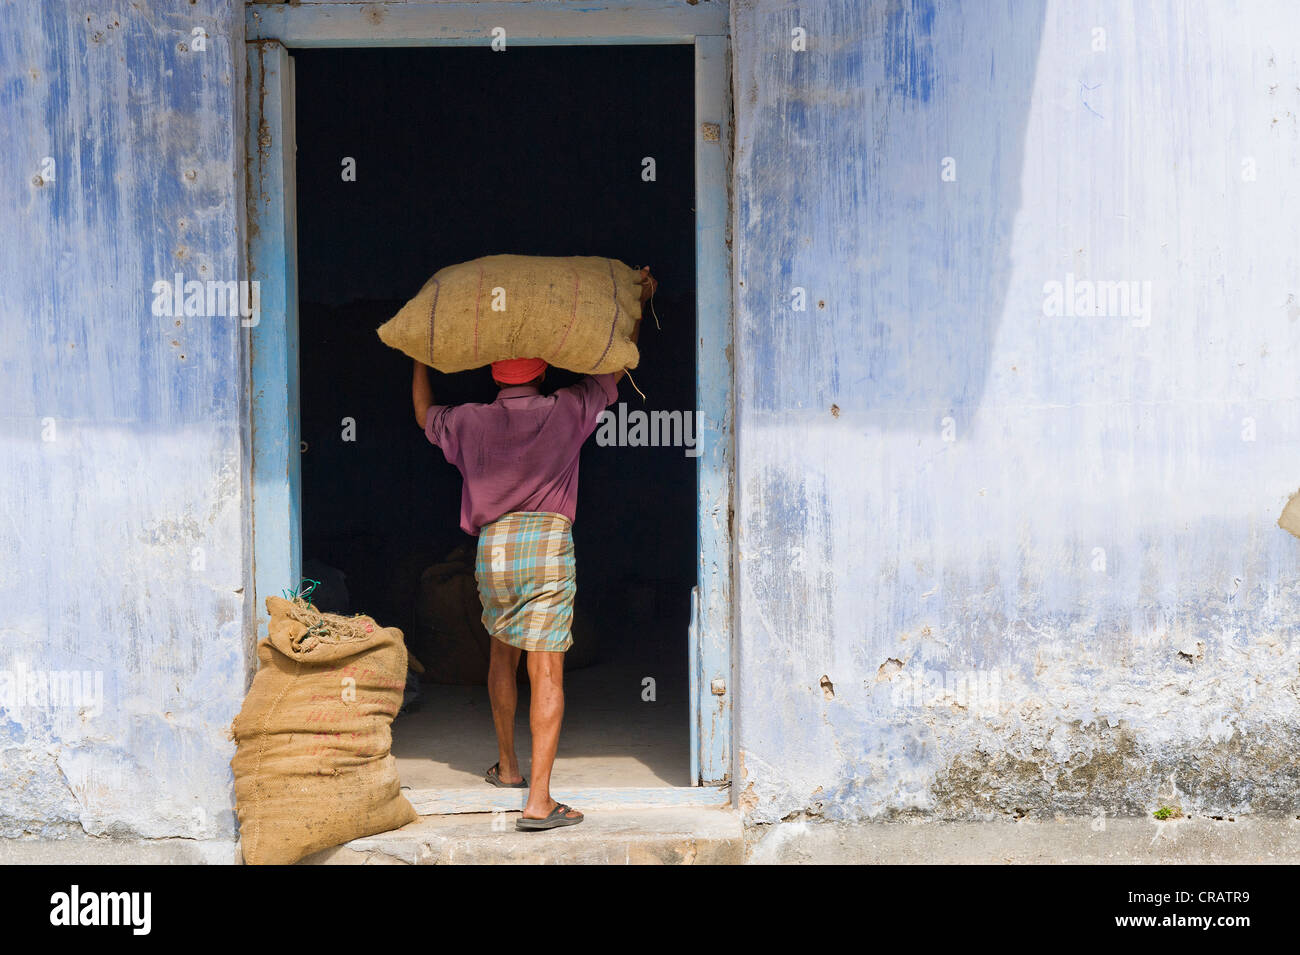 Worker carrying a bag of spices into a storehouse, Jew Town, Kochi, Kerala, southern India, India, Asia Stock Photo